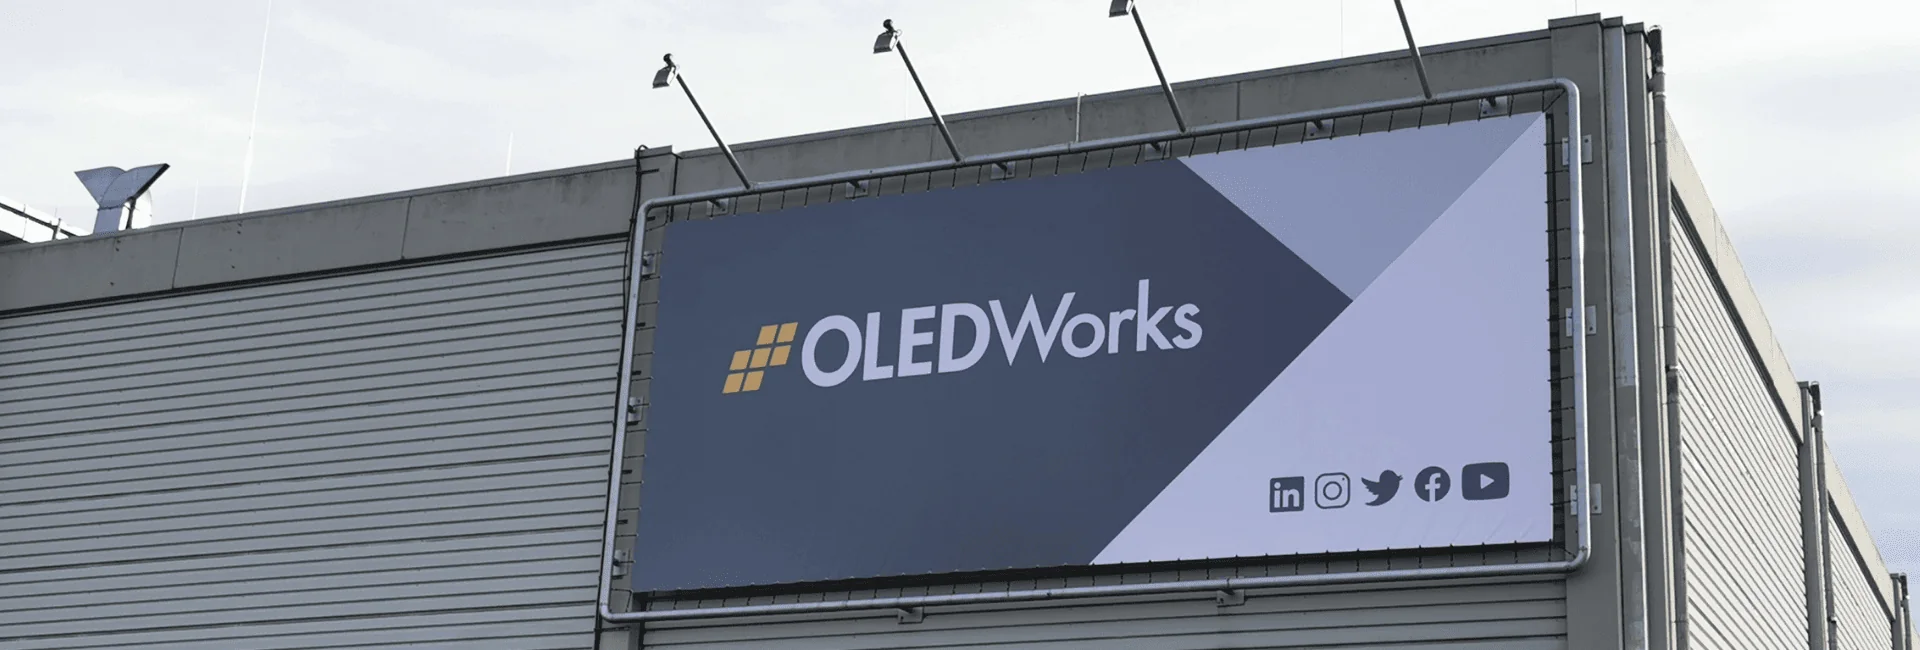 OLEDWorks – The Best People, Products, and Production in OLED Technology